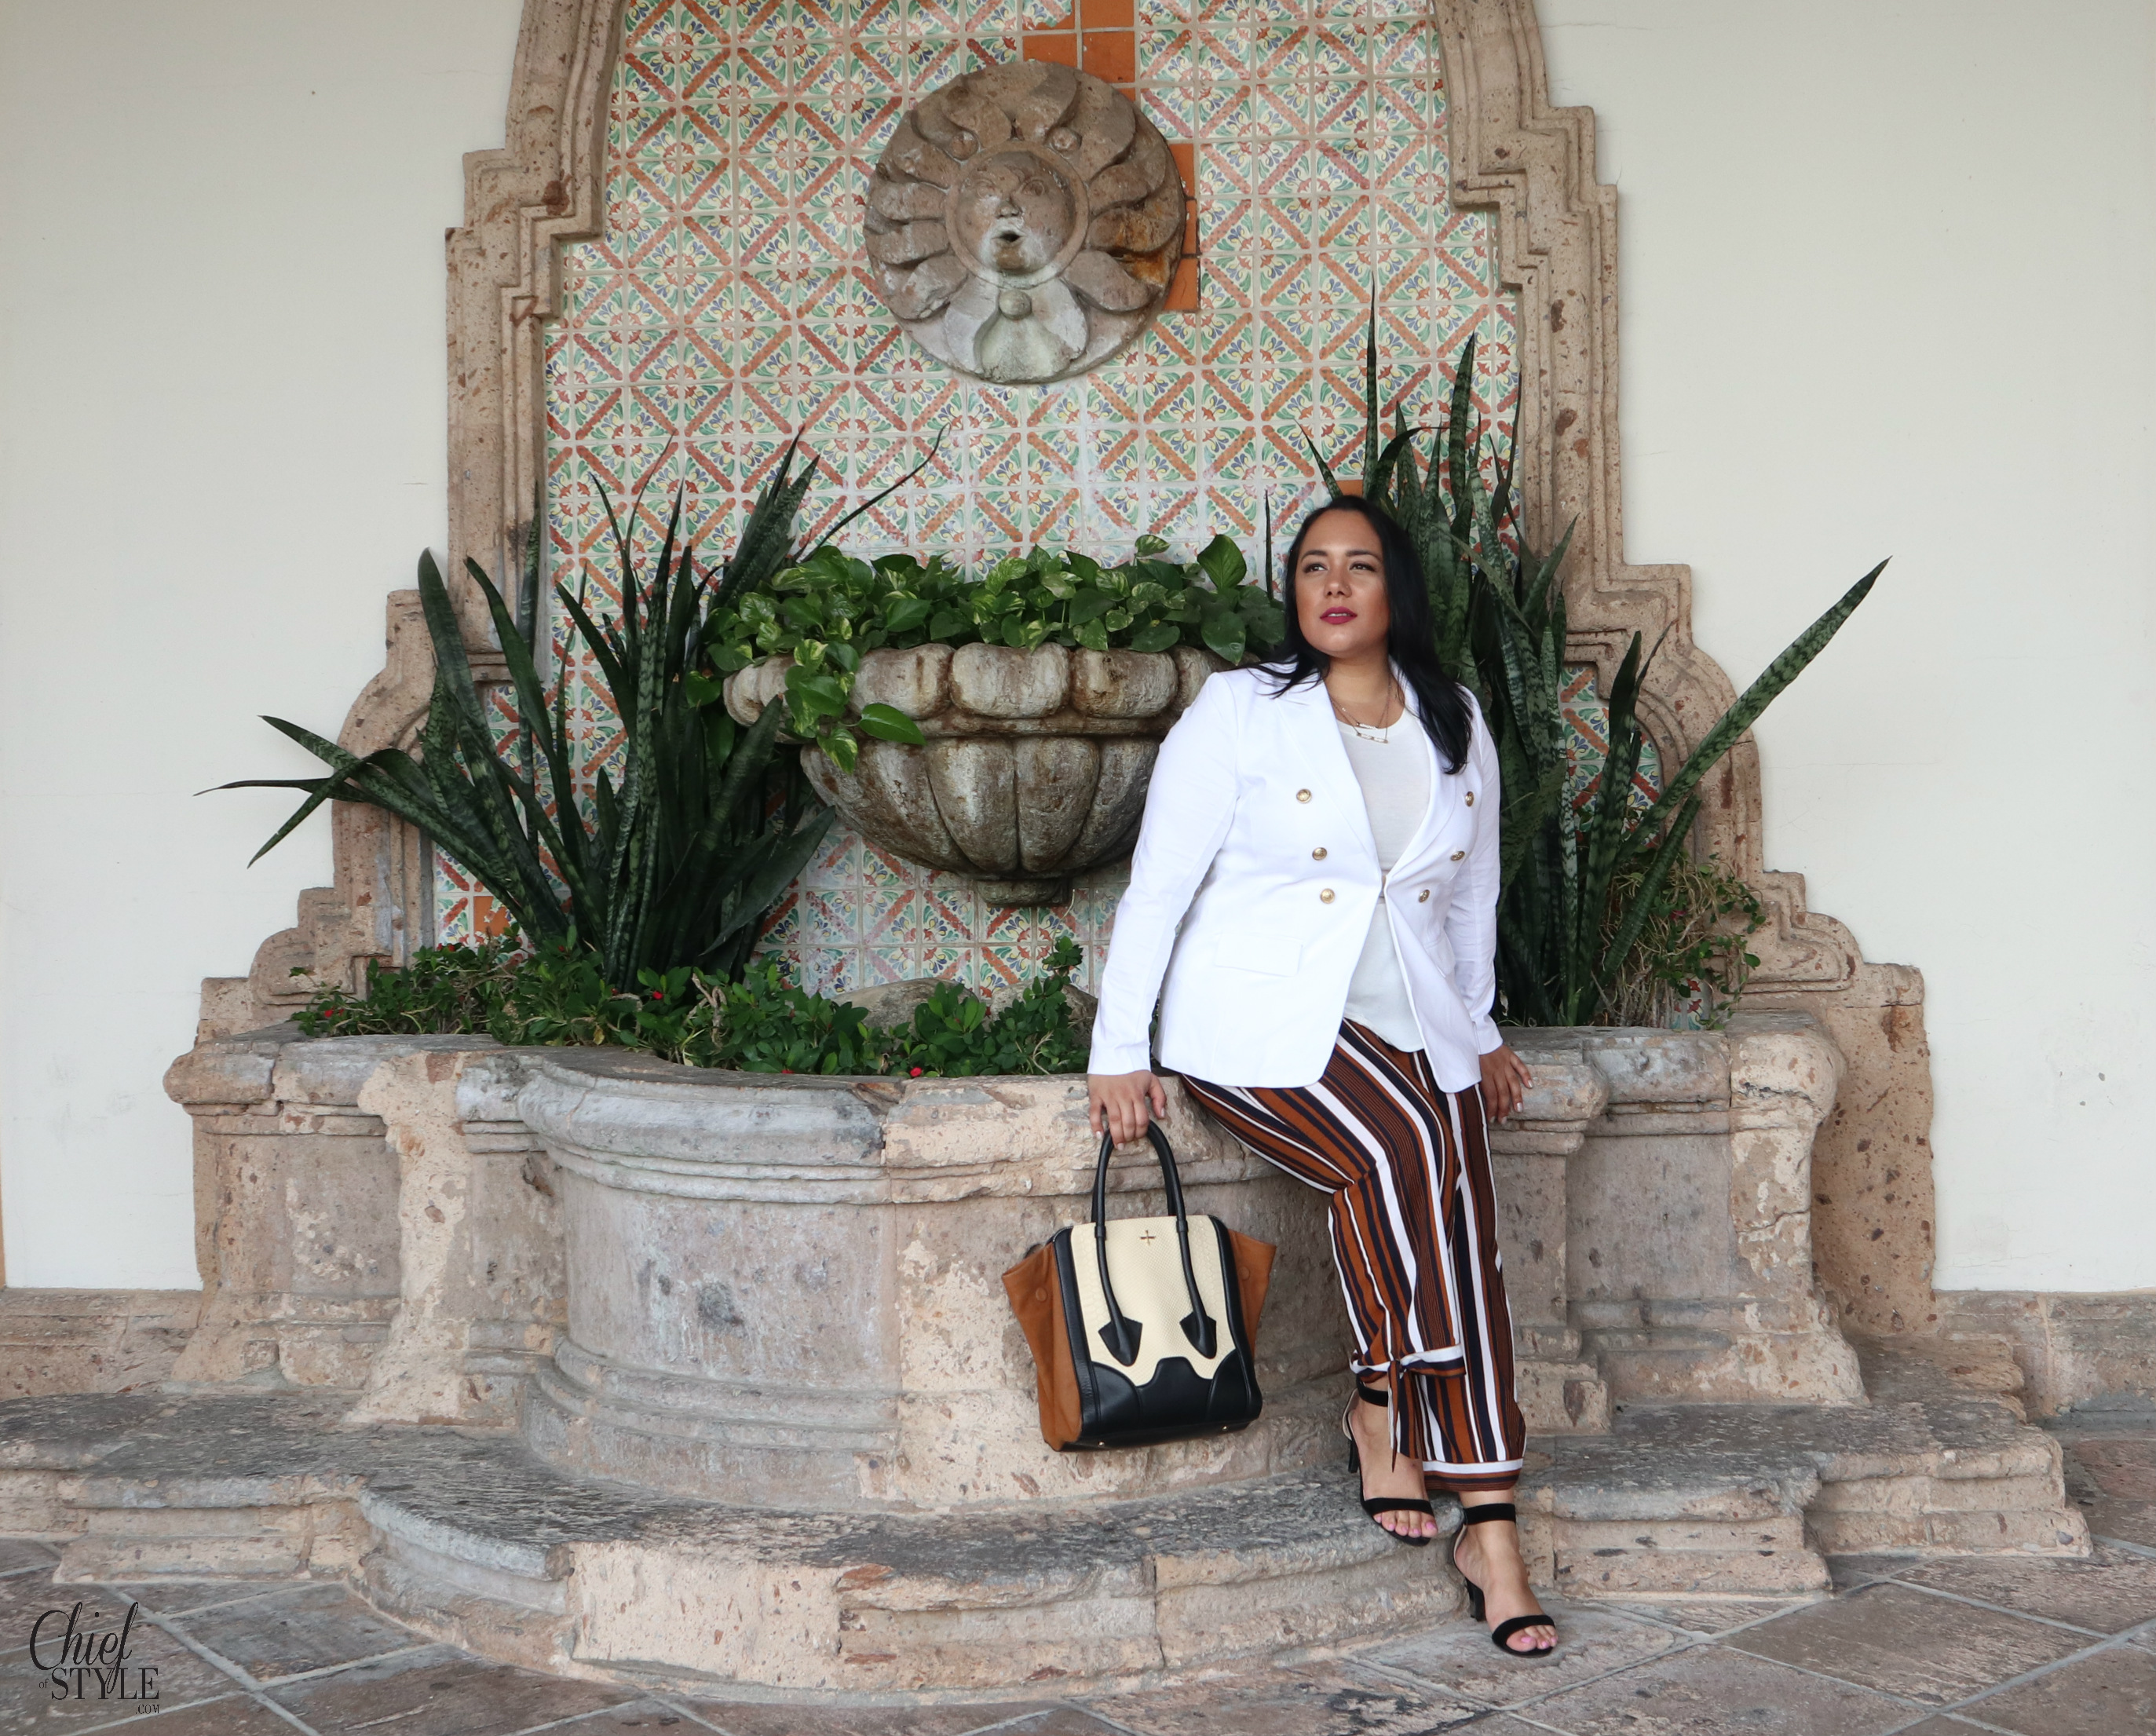 Amy Stretten Chief of Style in Palm Springs, California wearing plus size clothing by Lane Bryant blazer and Fashion Nova Pants with a Pour La Victoire tote bag